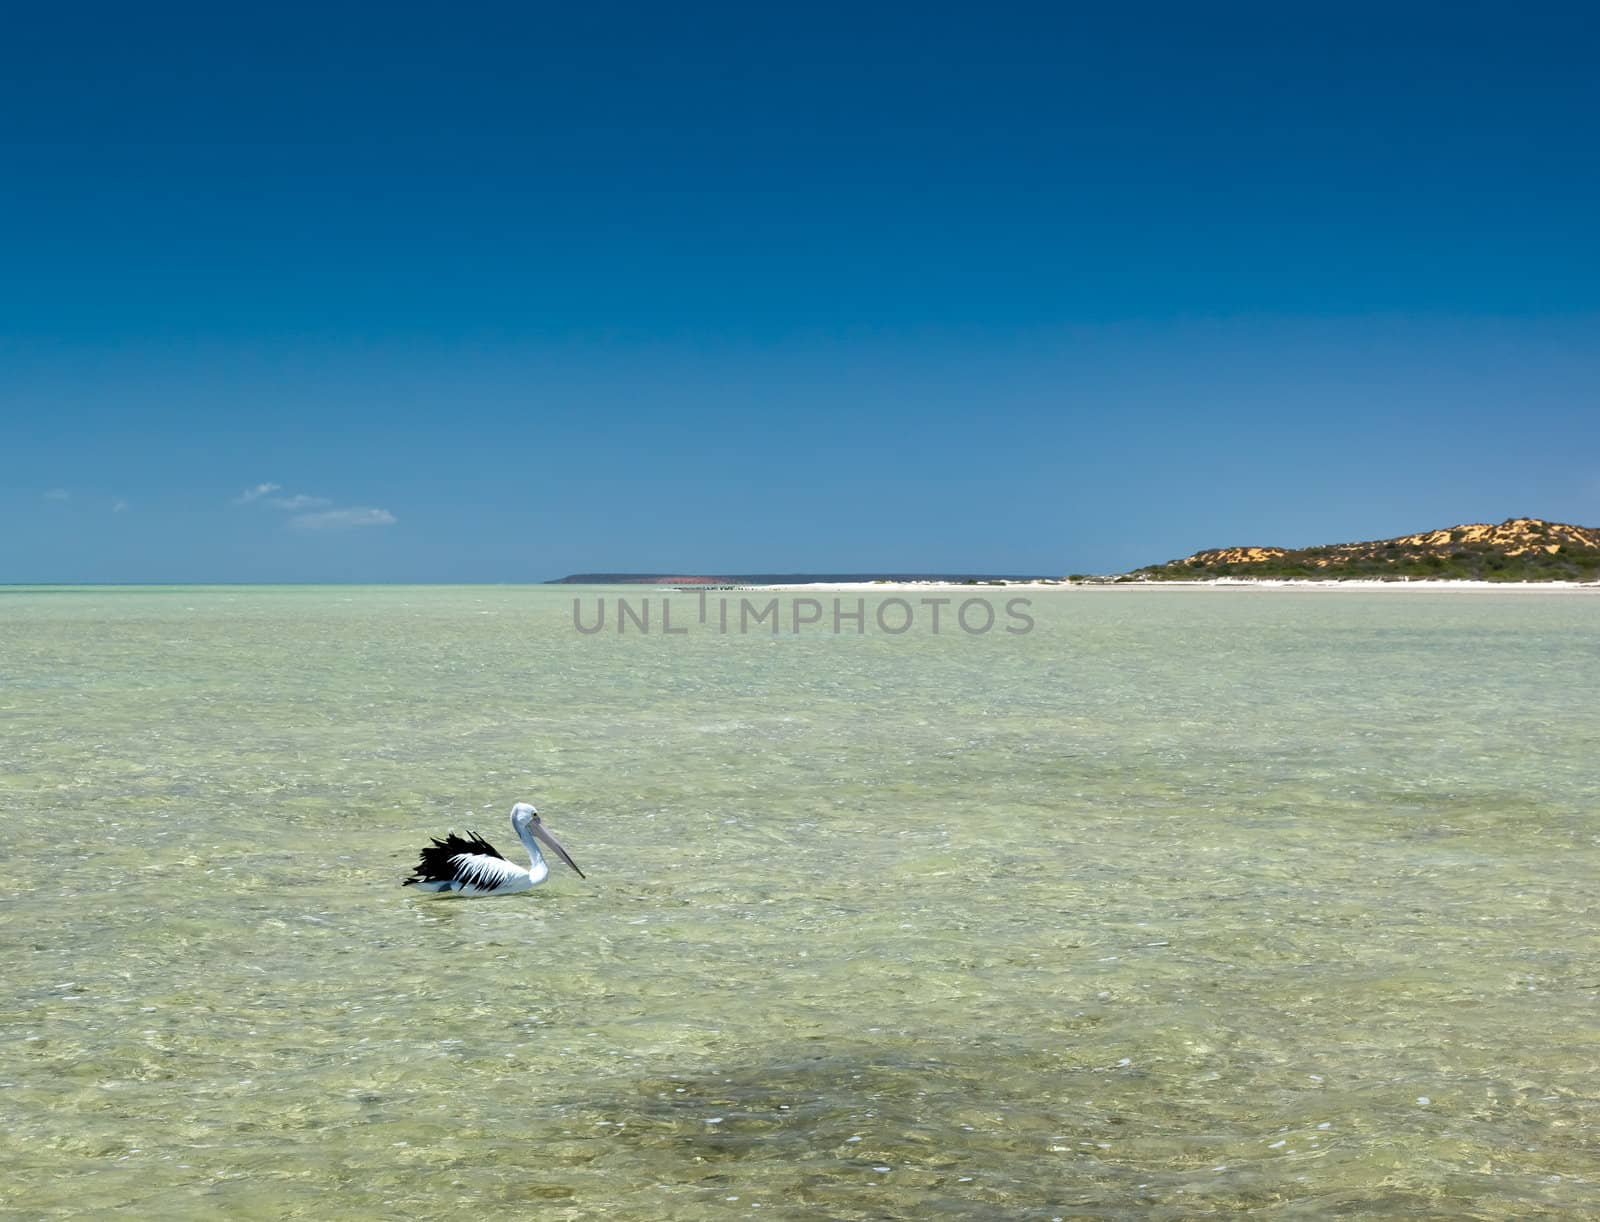 An image of a nice swmming pelican